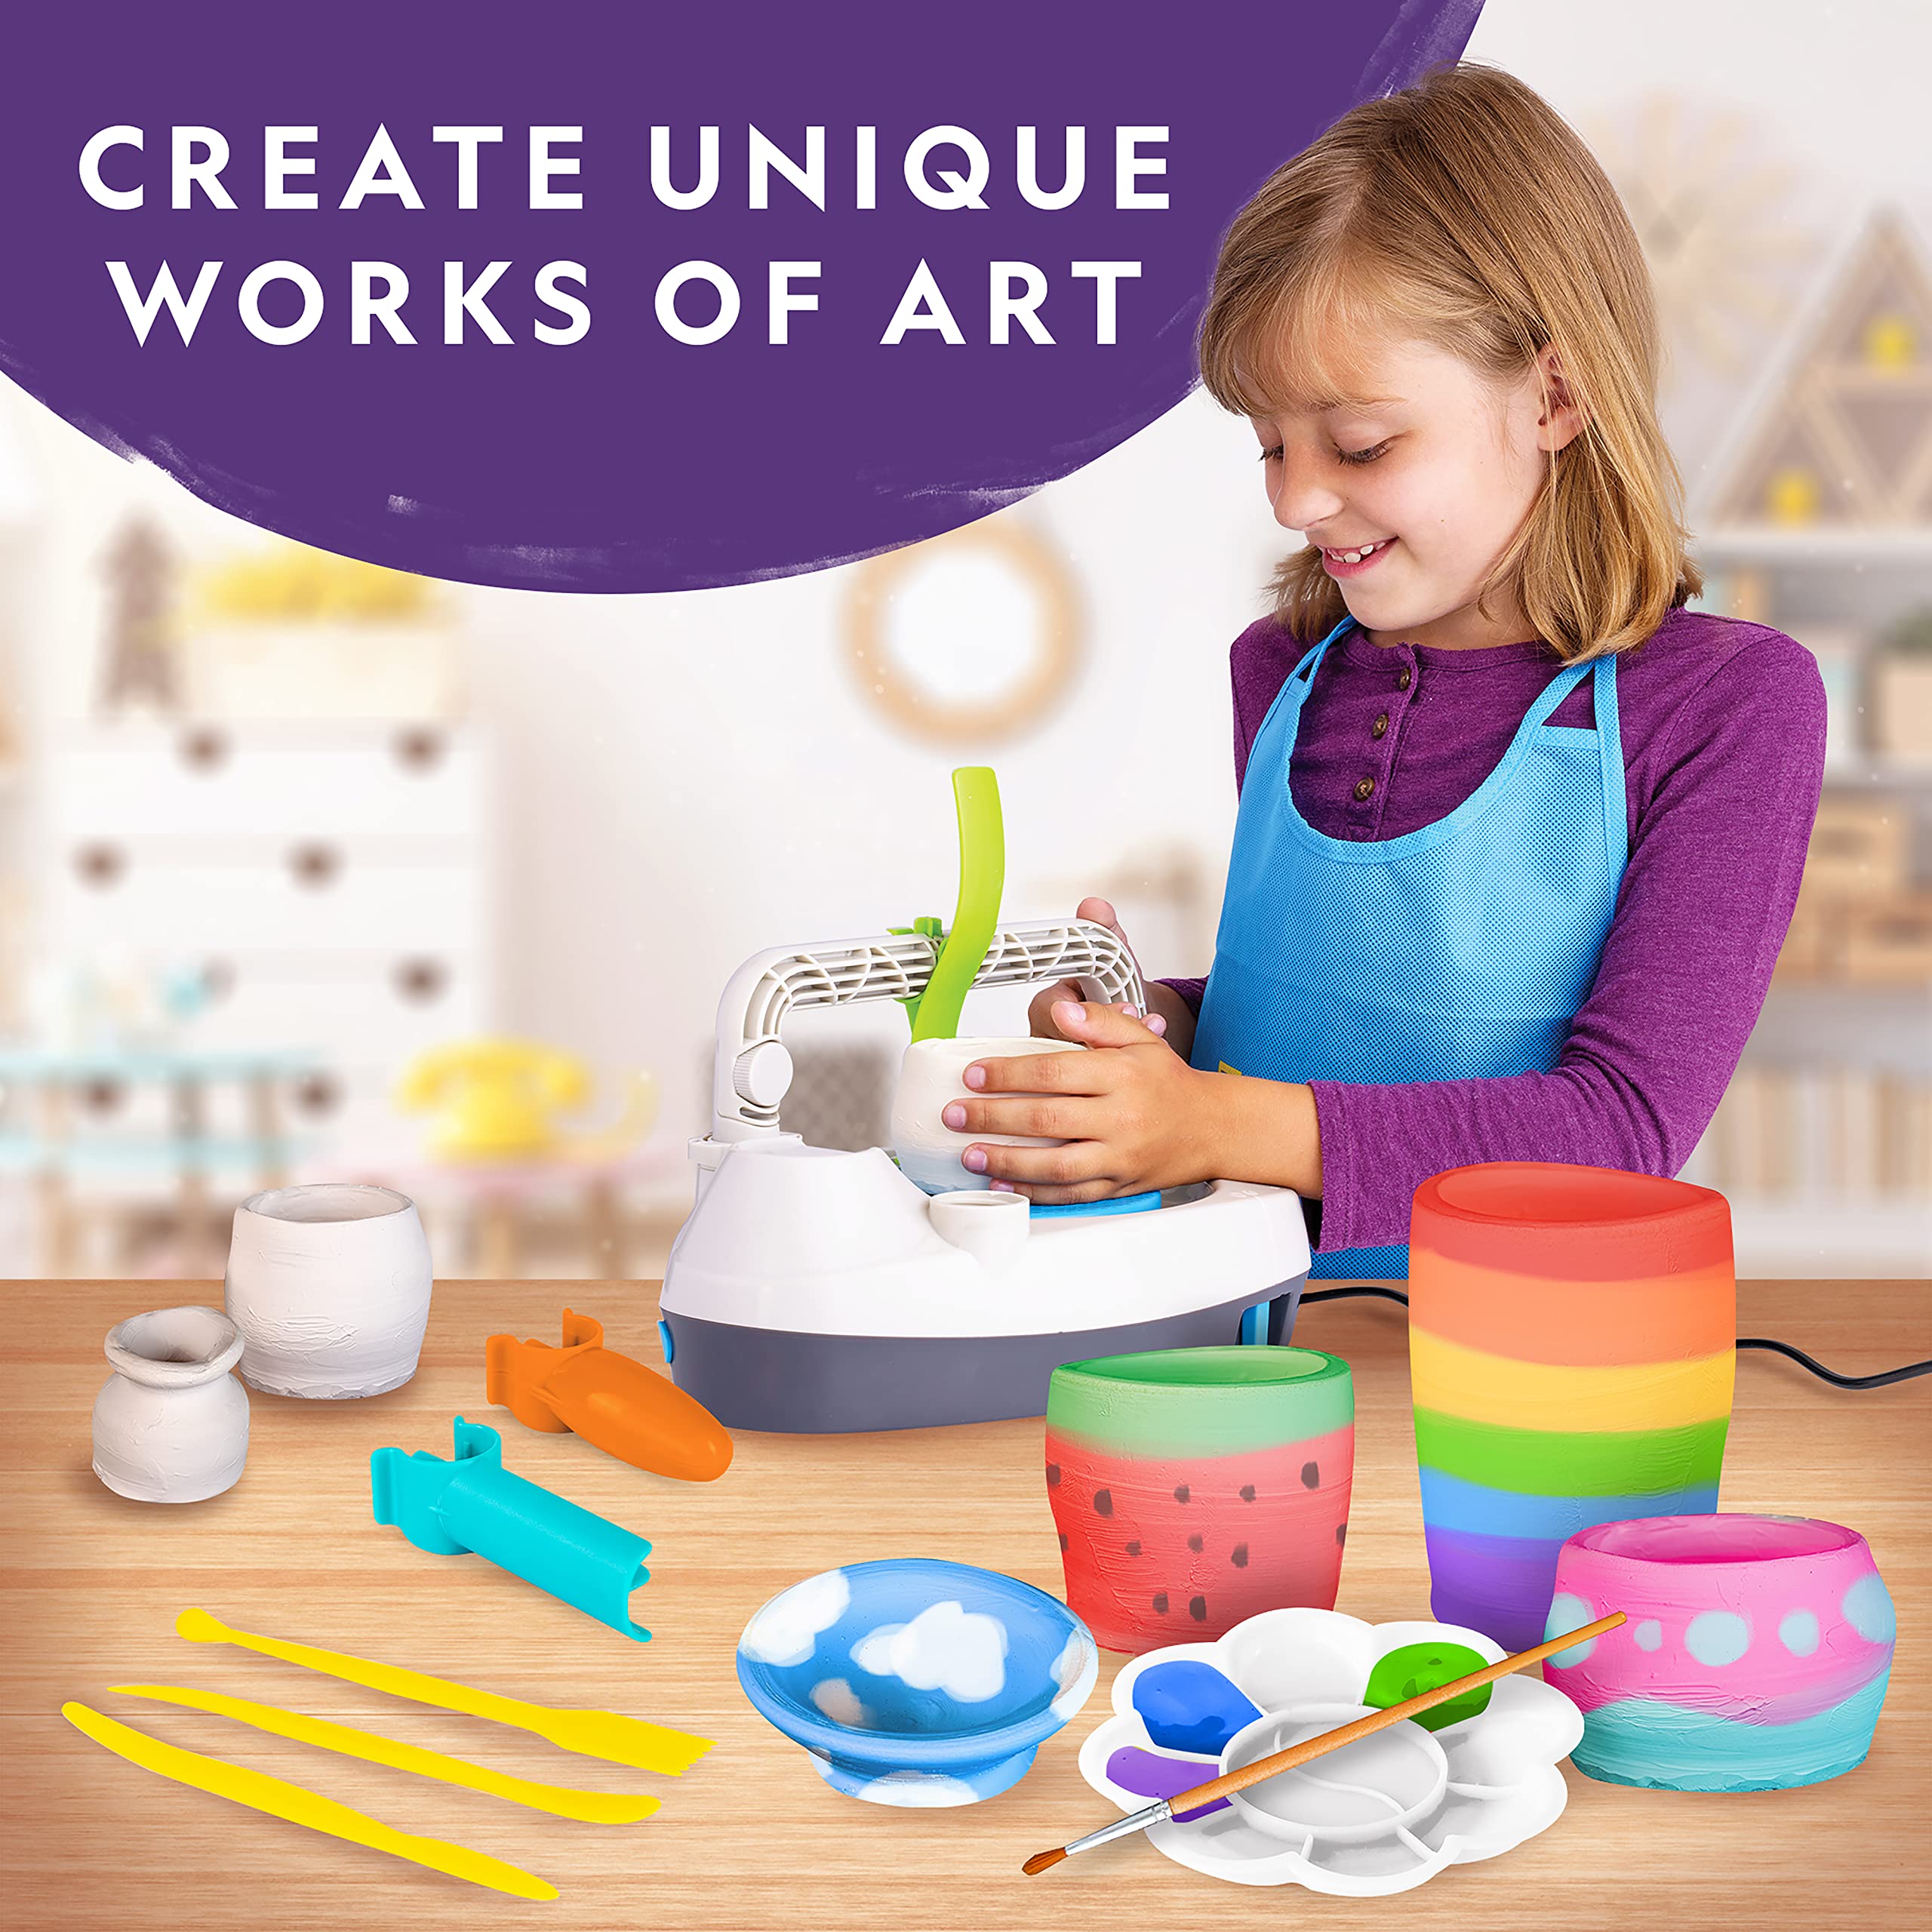 NATIONAL GEOGRAPHIC Pottery Wheel for Kids – Complete Pottery Kit for Beginners, Plug-In Motor, 2 lbs. Air Dry Clay, Sculpting Clay Tools, Apron & More, Patent Pending, Craft Kit (Amazon Exclusive)